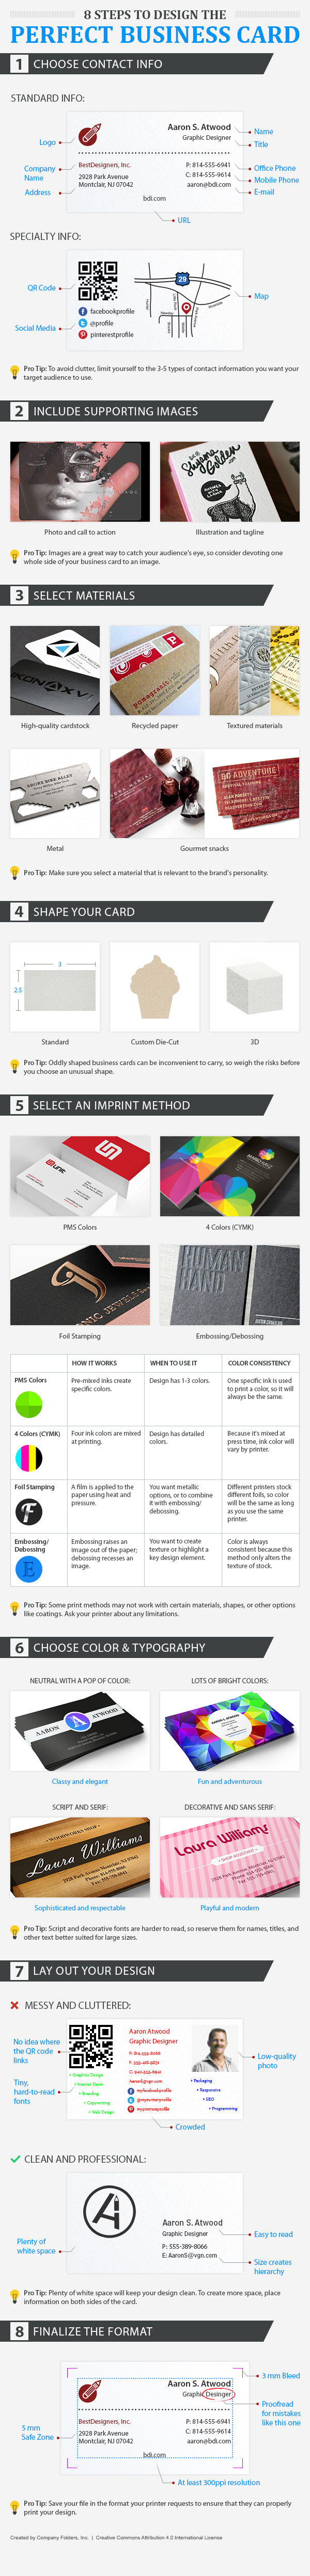 Business card design tips - infographic